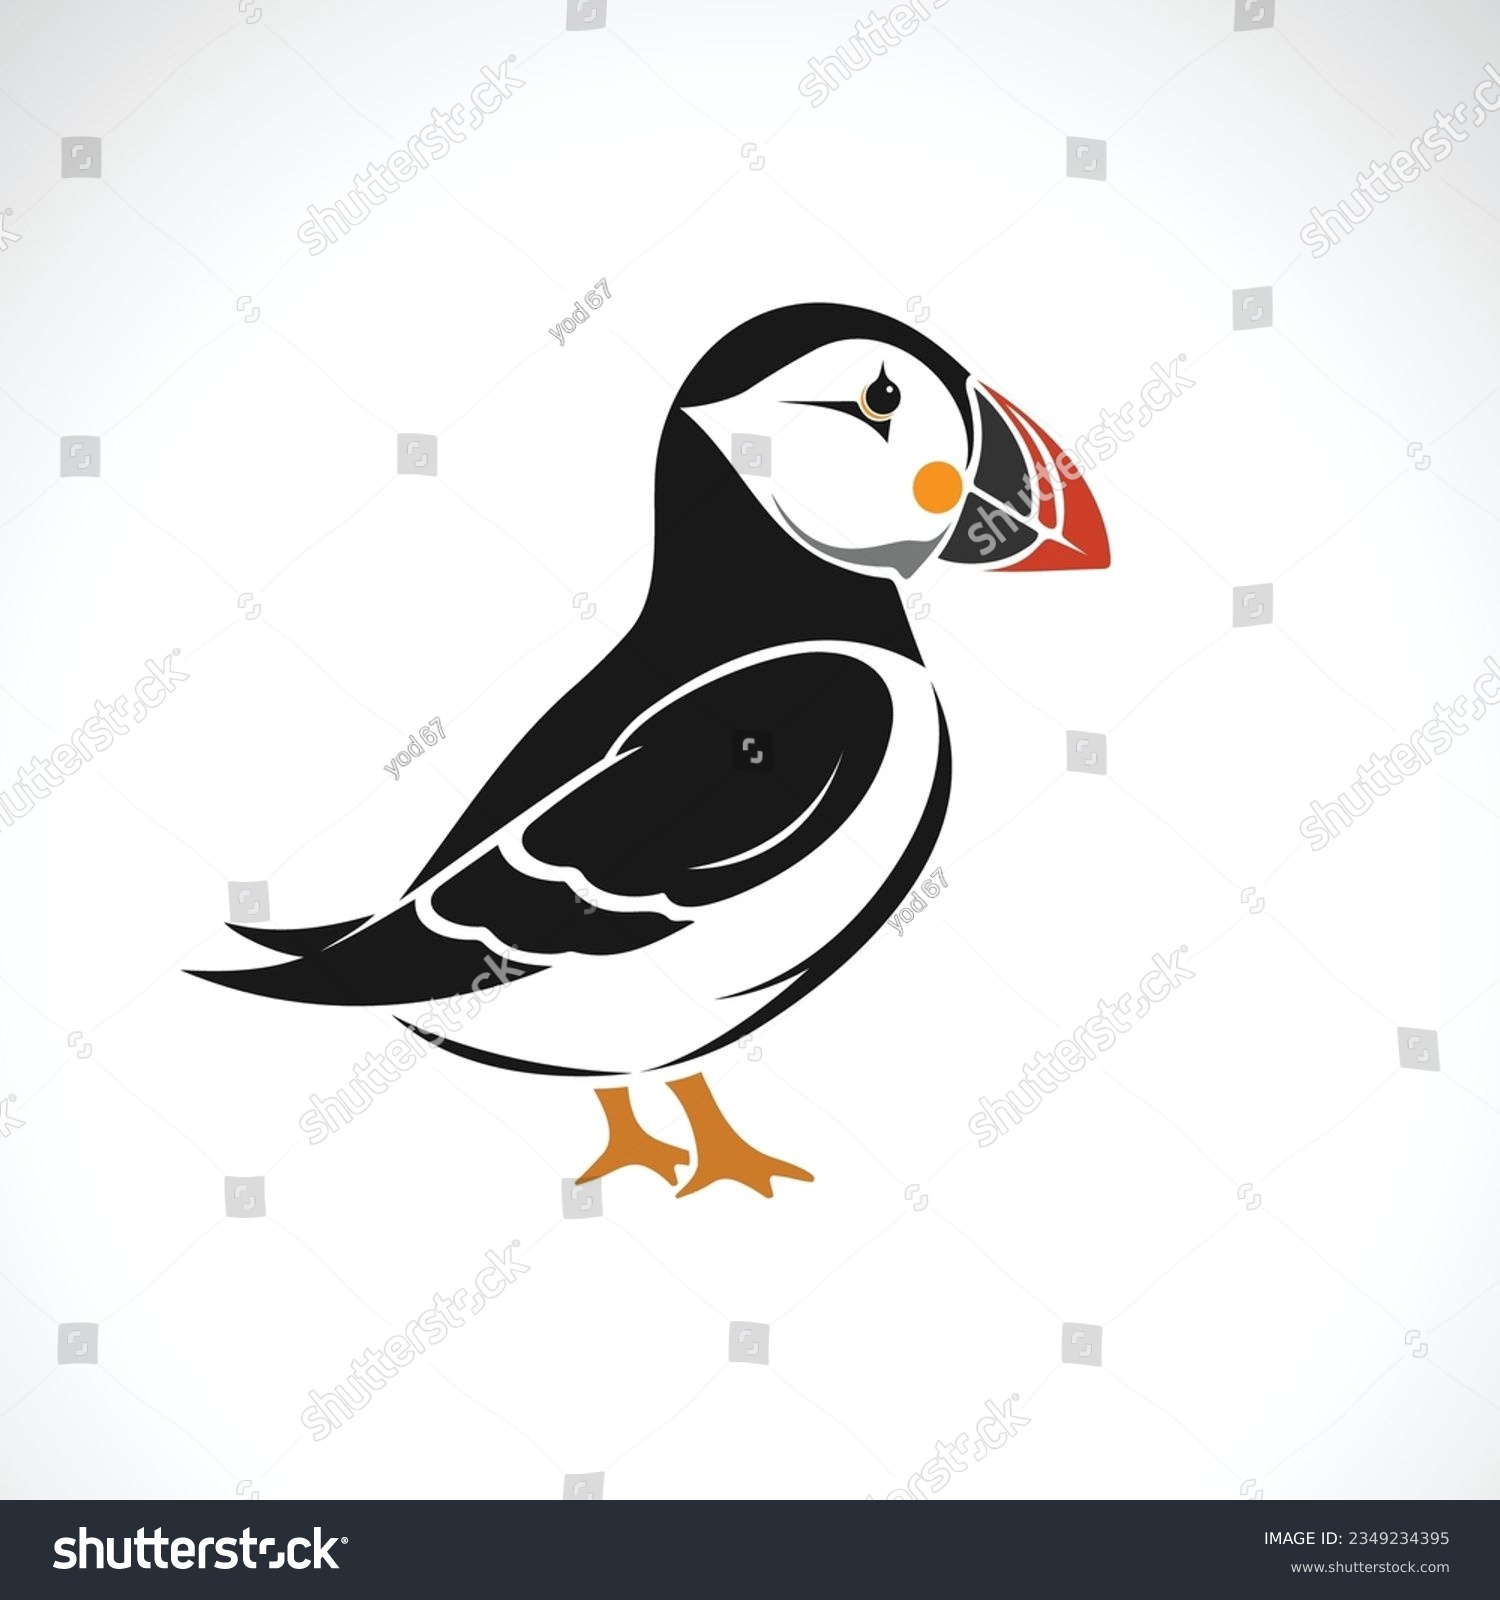 SVG of Vector of a puffin bird design on white background. Wildlife Animals. Easy editable layered vector illustration. svg